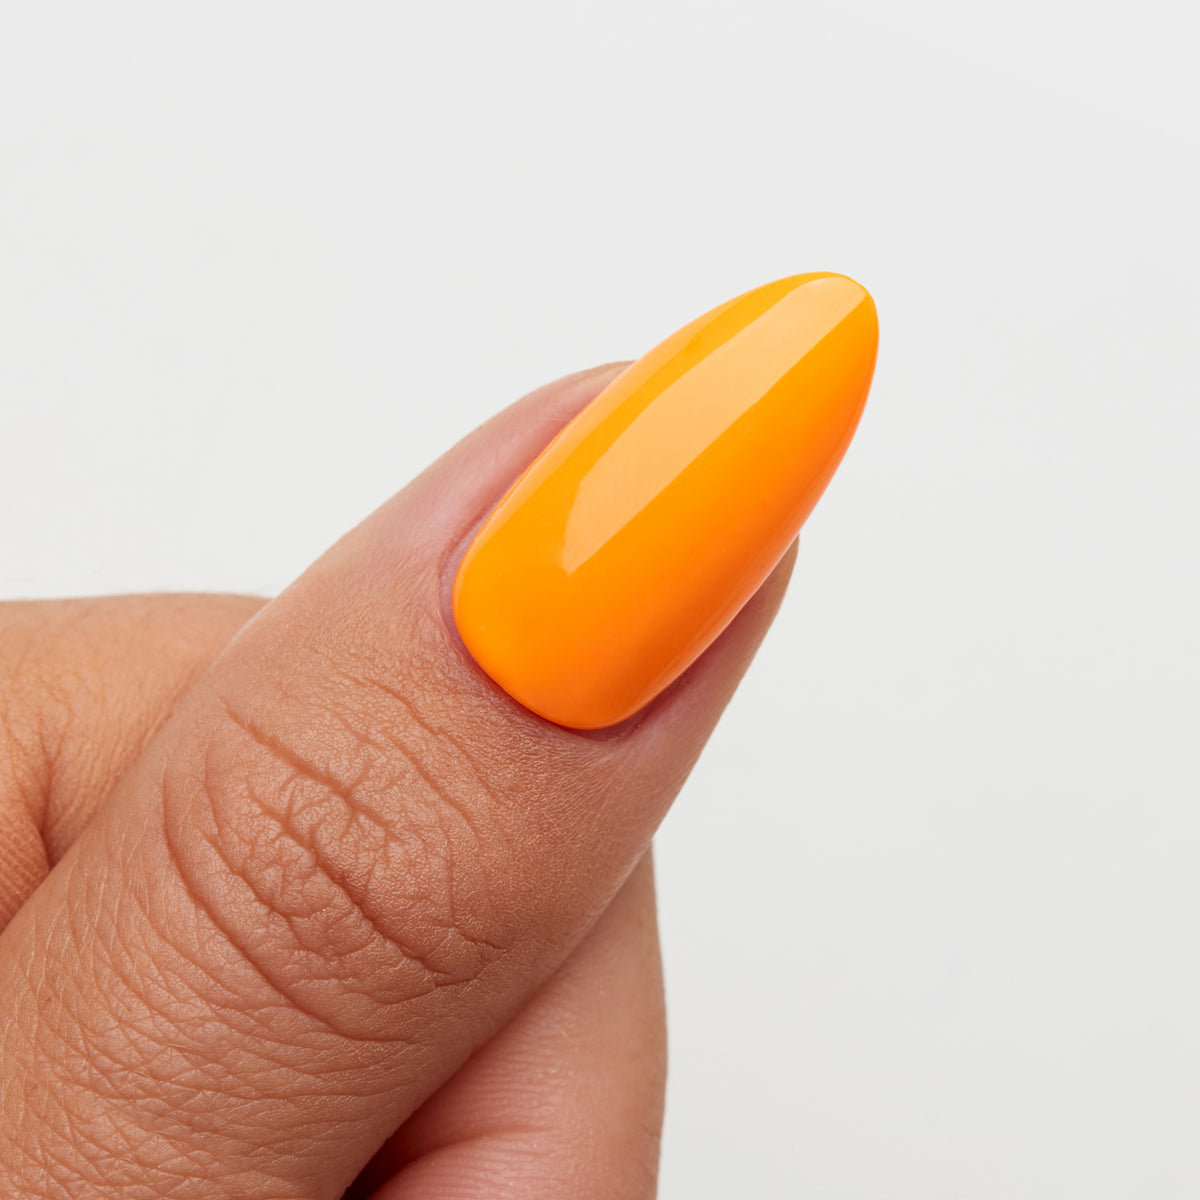 Gelous Tropical Punch gel nail polish swatch - photographed in New Zealand